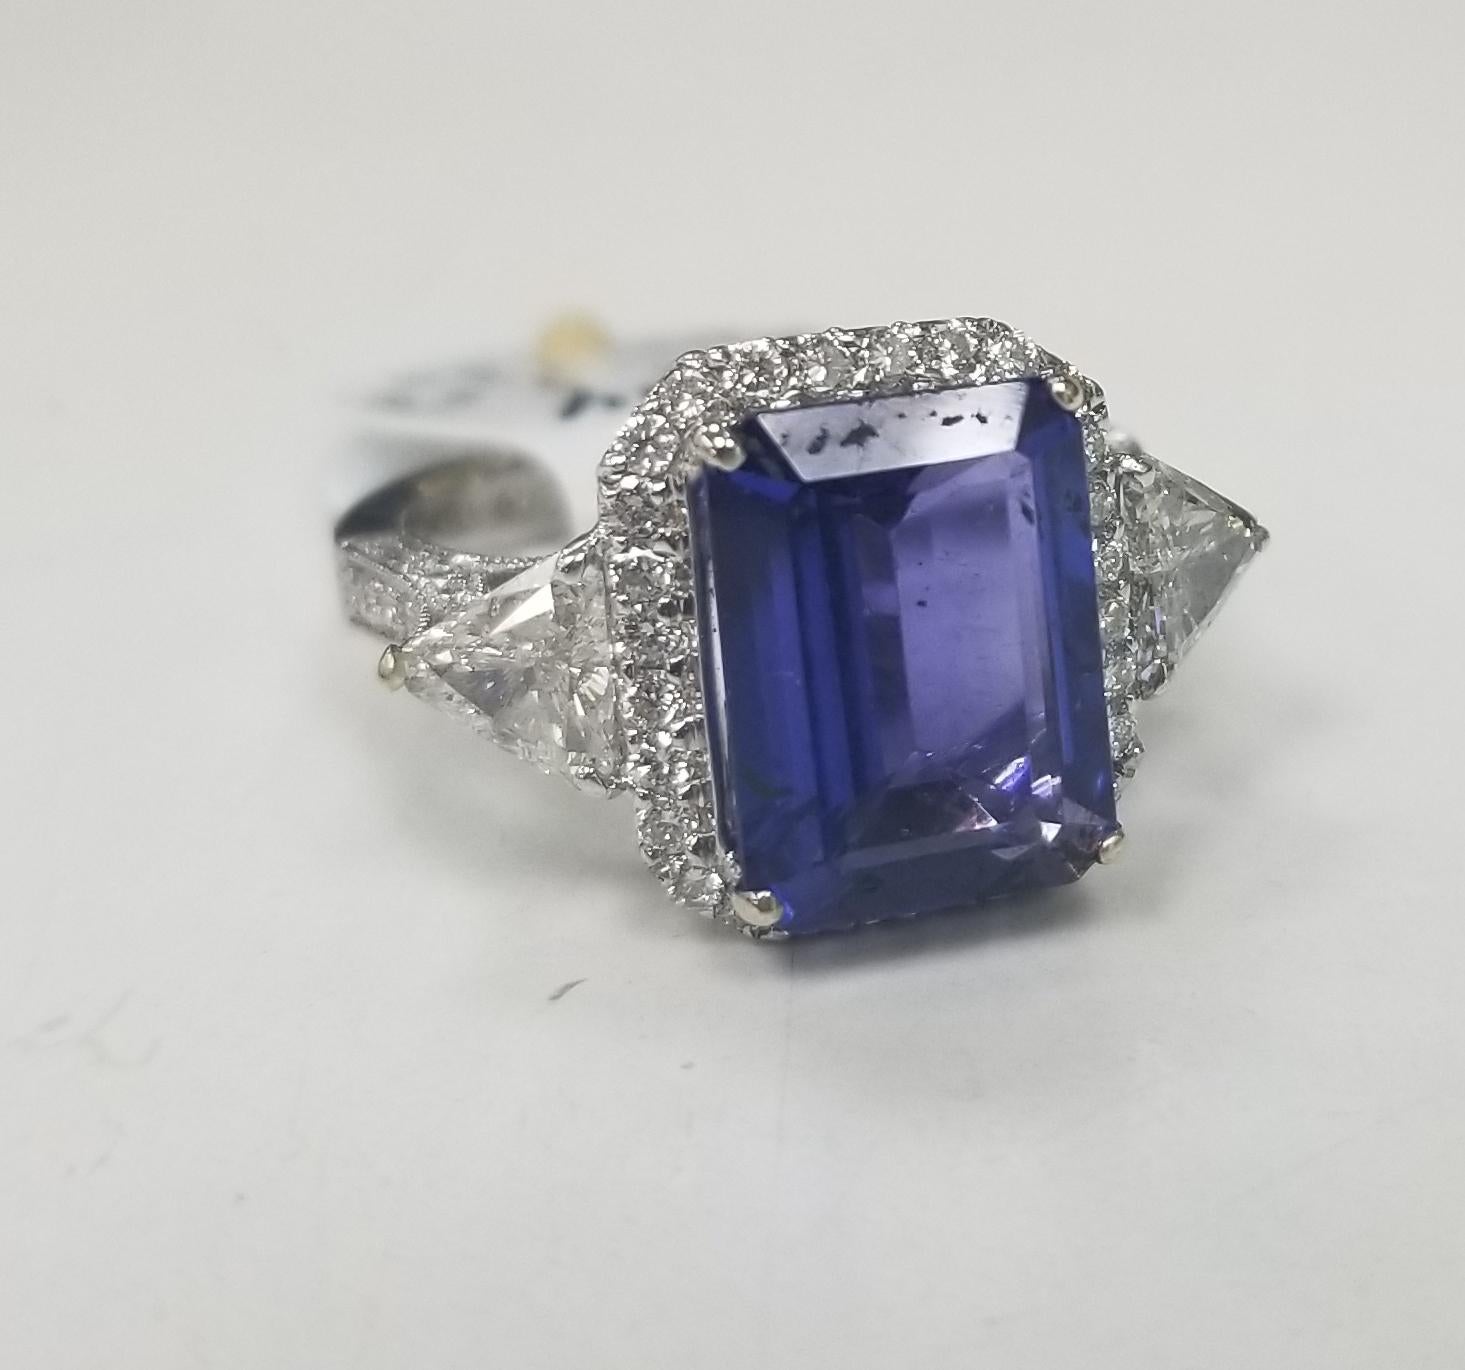 *Motivated to Sell – Please make a Fair Offer*
Specifications:
    main stone: Tanzanite Emerald-cut 3.53ct A-Quality 
    diamond; 2 trillion cut diamonds weighing .53pts. rounds .22pts.
    diamond; clarity: VS1-2
    diamond; color: G
   